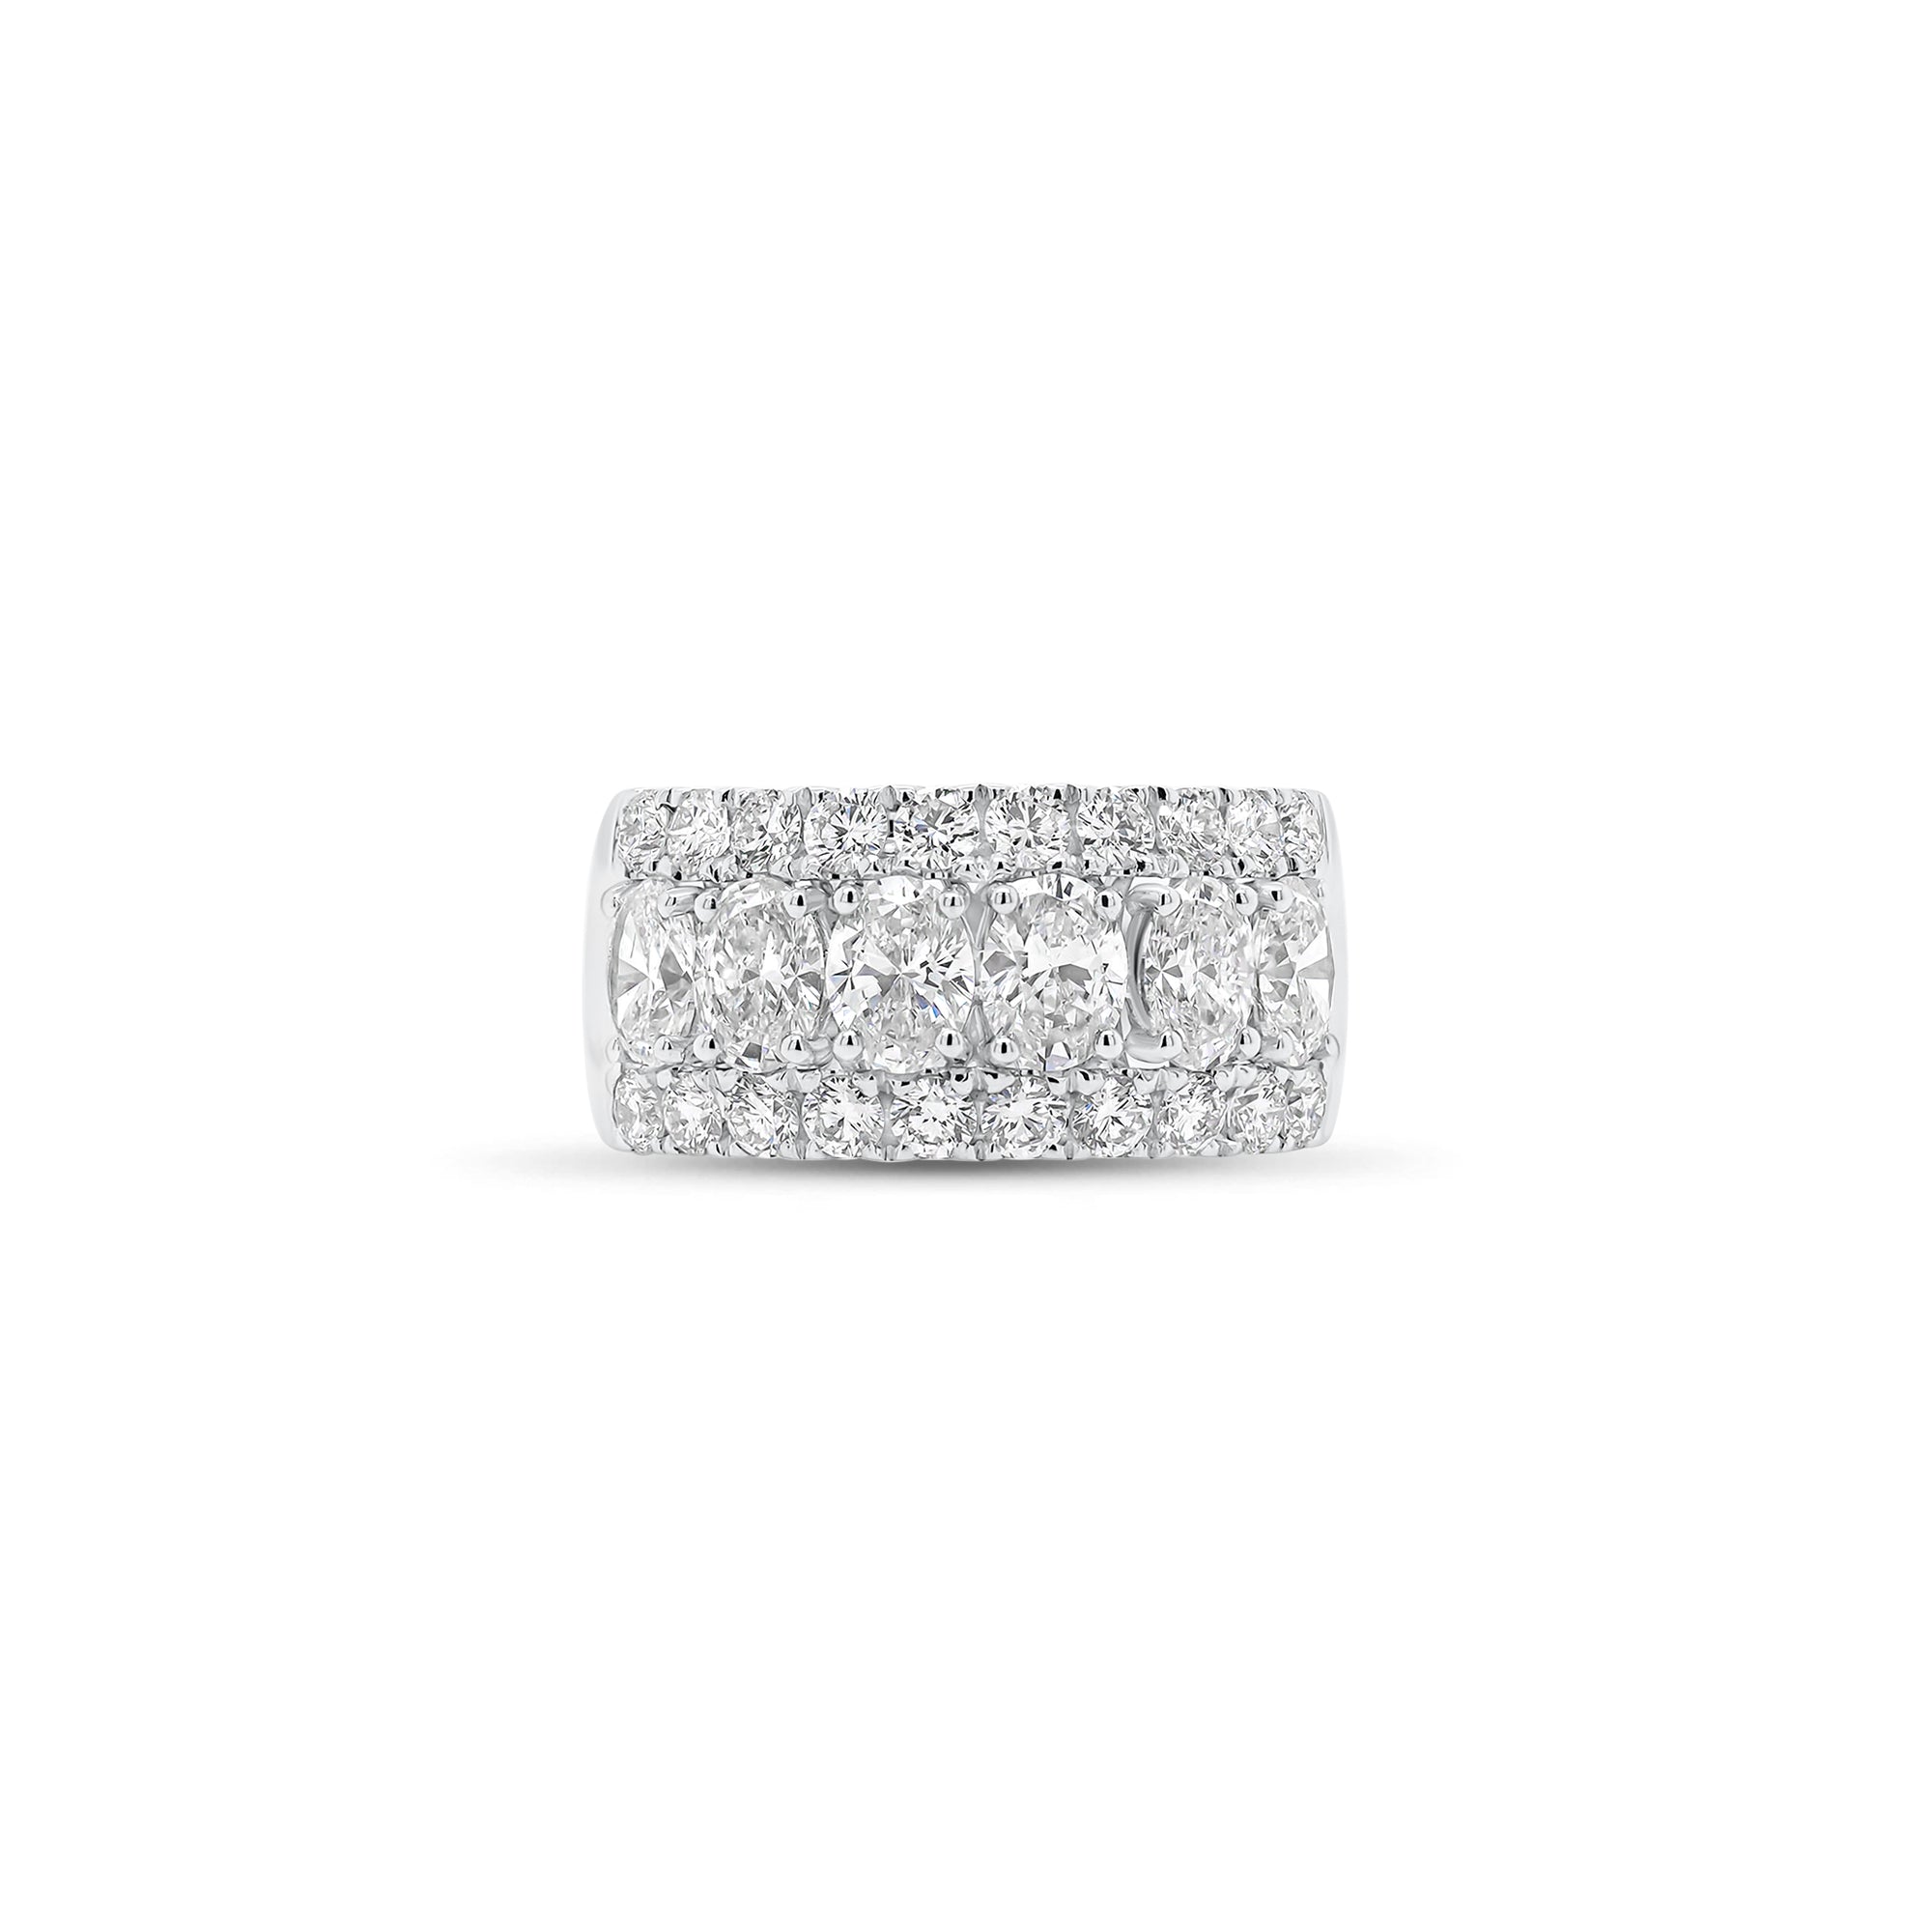 Oval and Round Diamond Wedding Band - 18K gold weighing 6.09 grams  - 6 oval-shaped diamonds weighing 1.82 carats  - 20 round diamonds weighing 0.89 carats